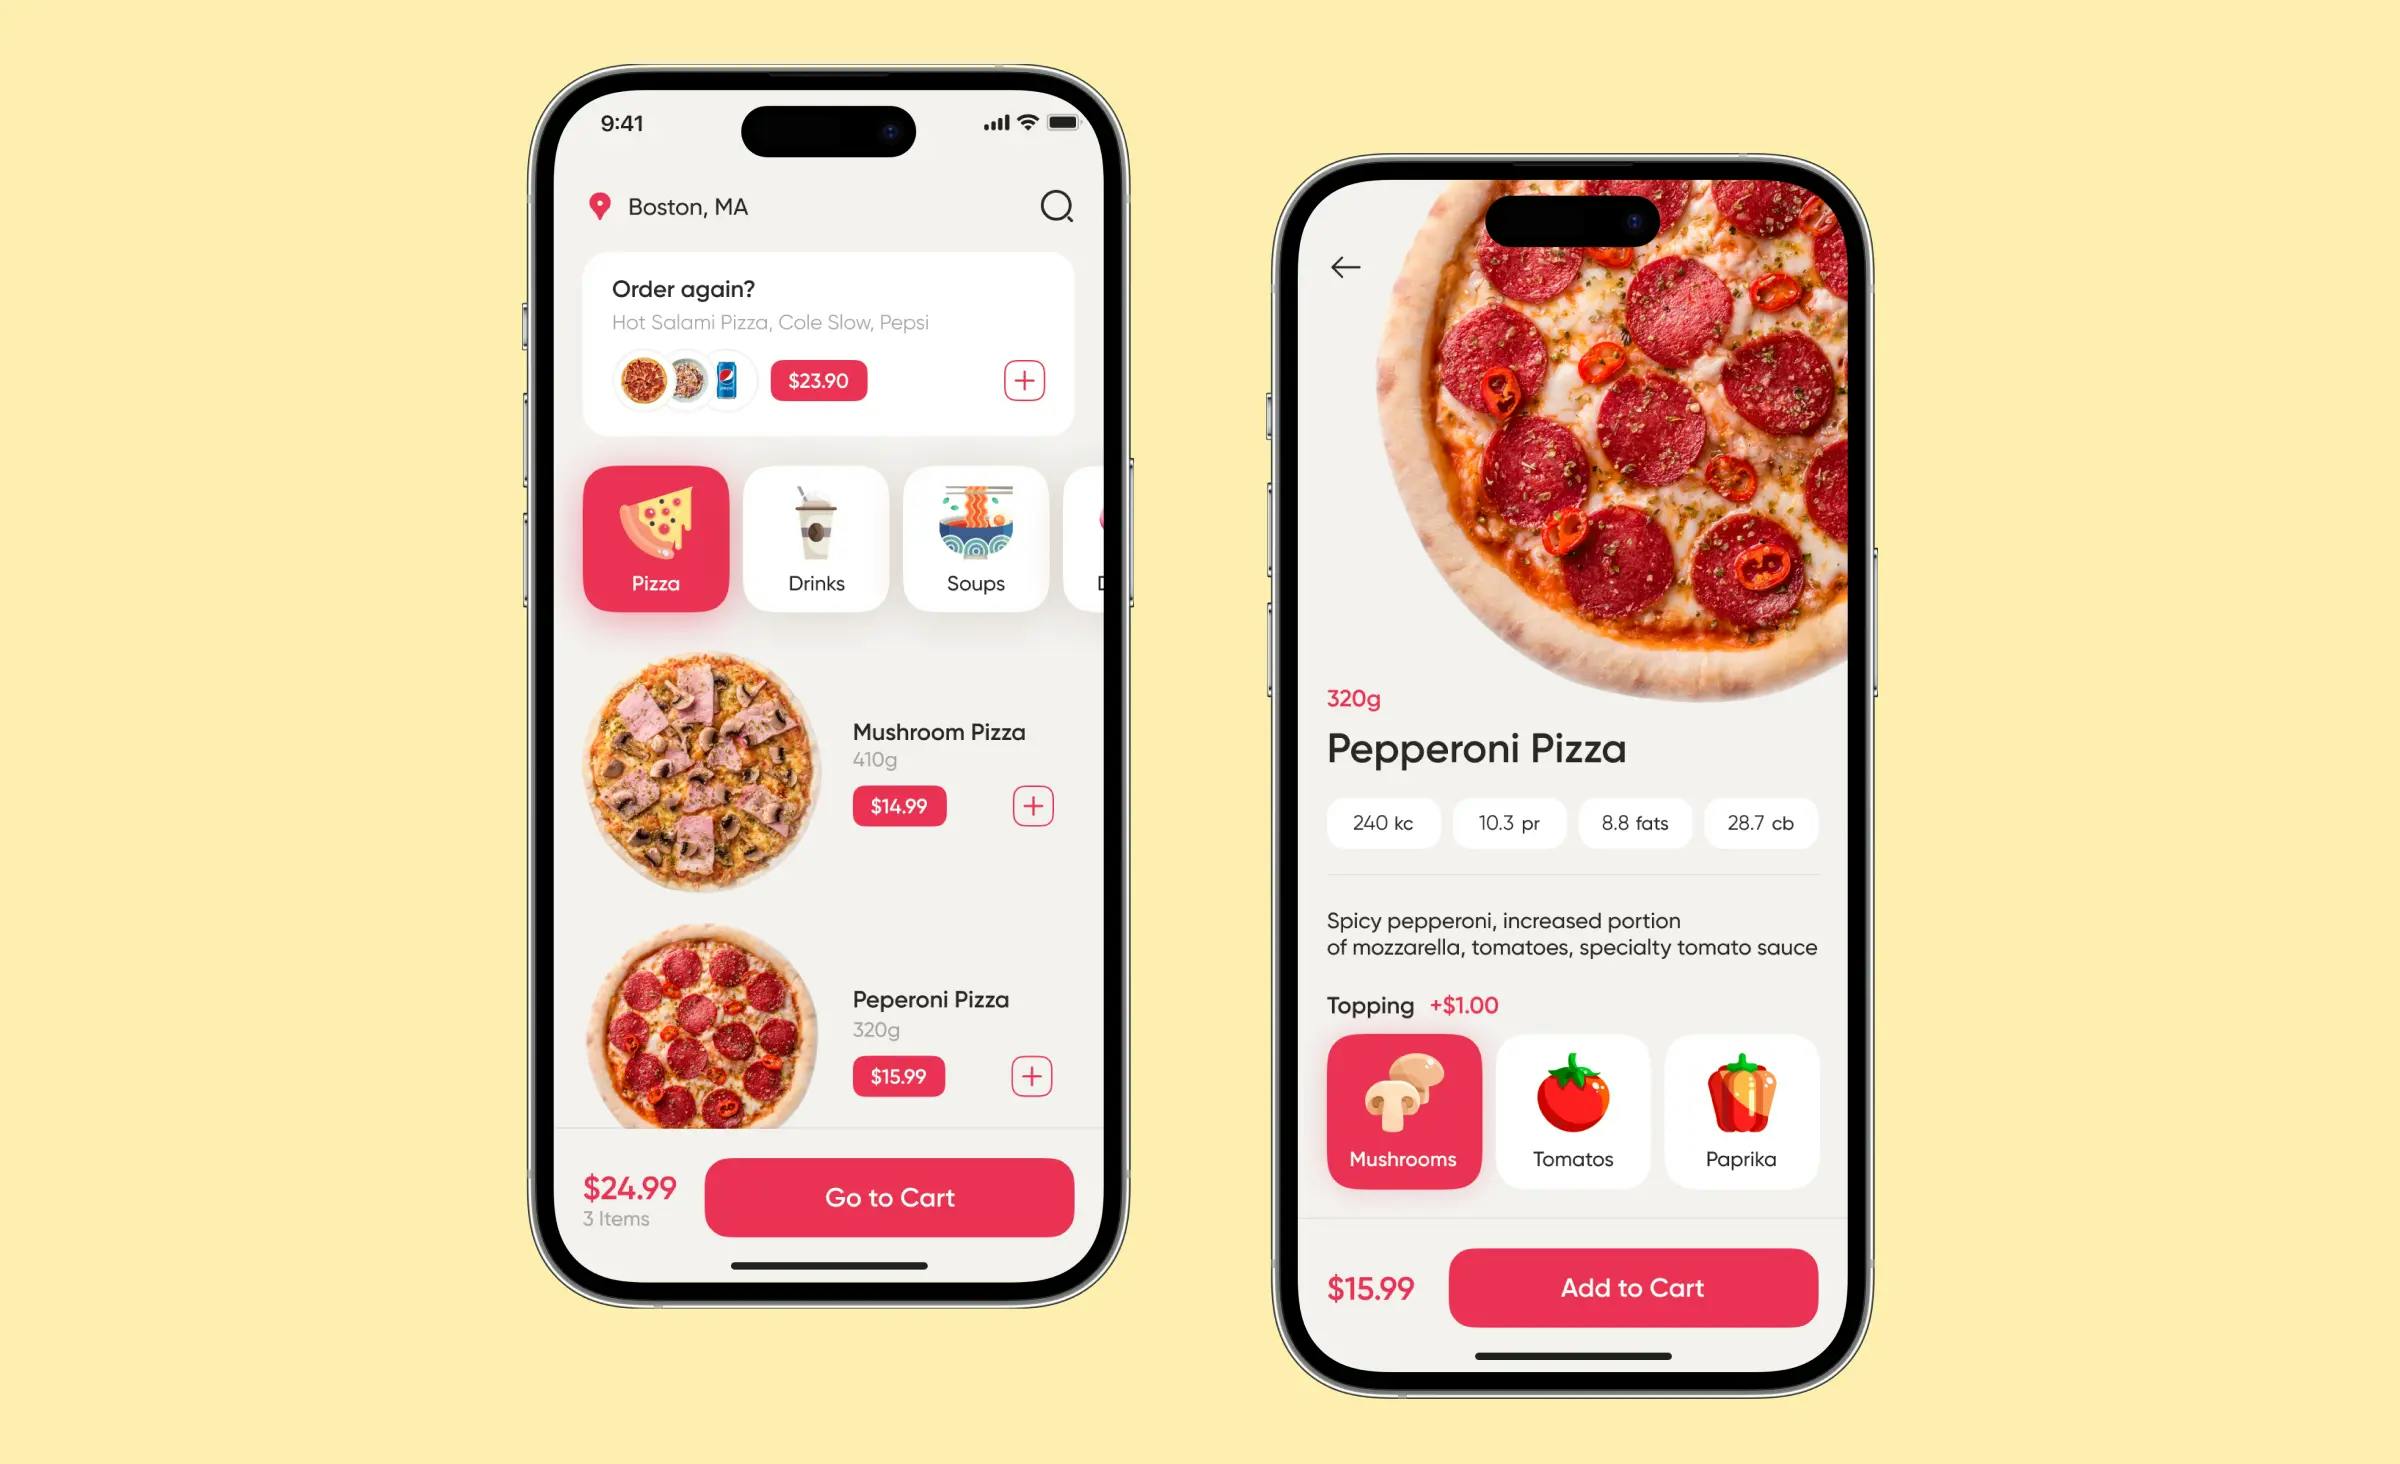 The image shows a pizza delivery app design concept for a single restaurant, created by Ronas IT. It displays two mobile screens; one screen presents the menu and its categories, while the other provides a description of a pizza.